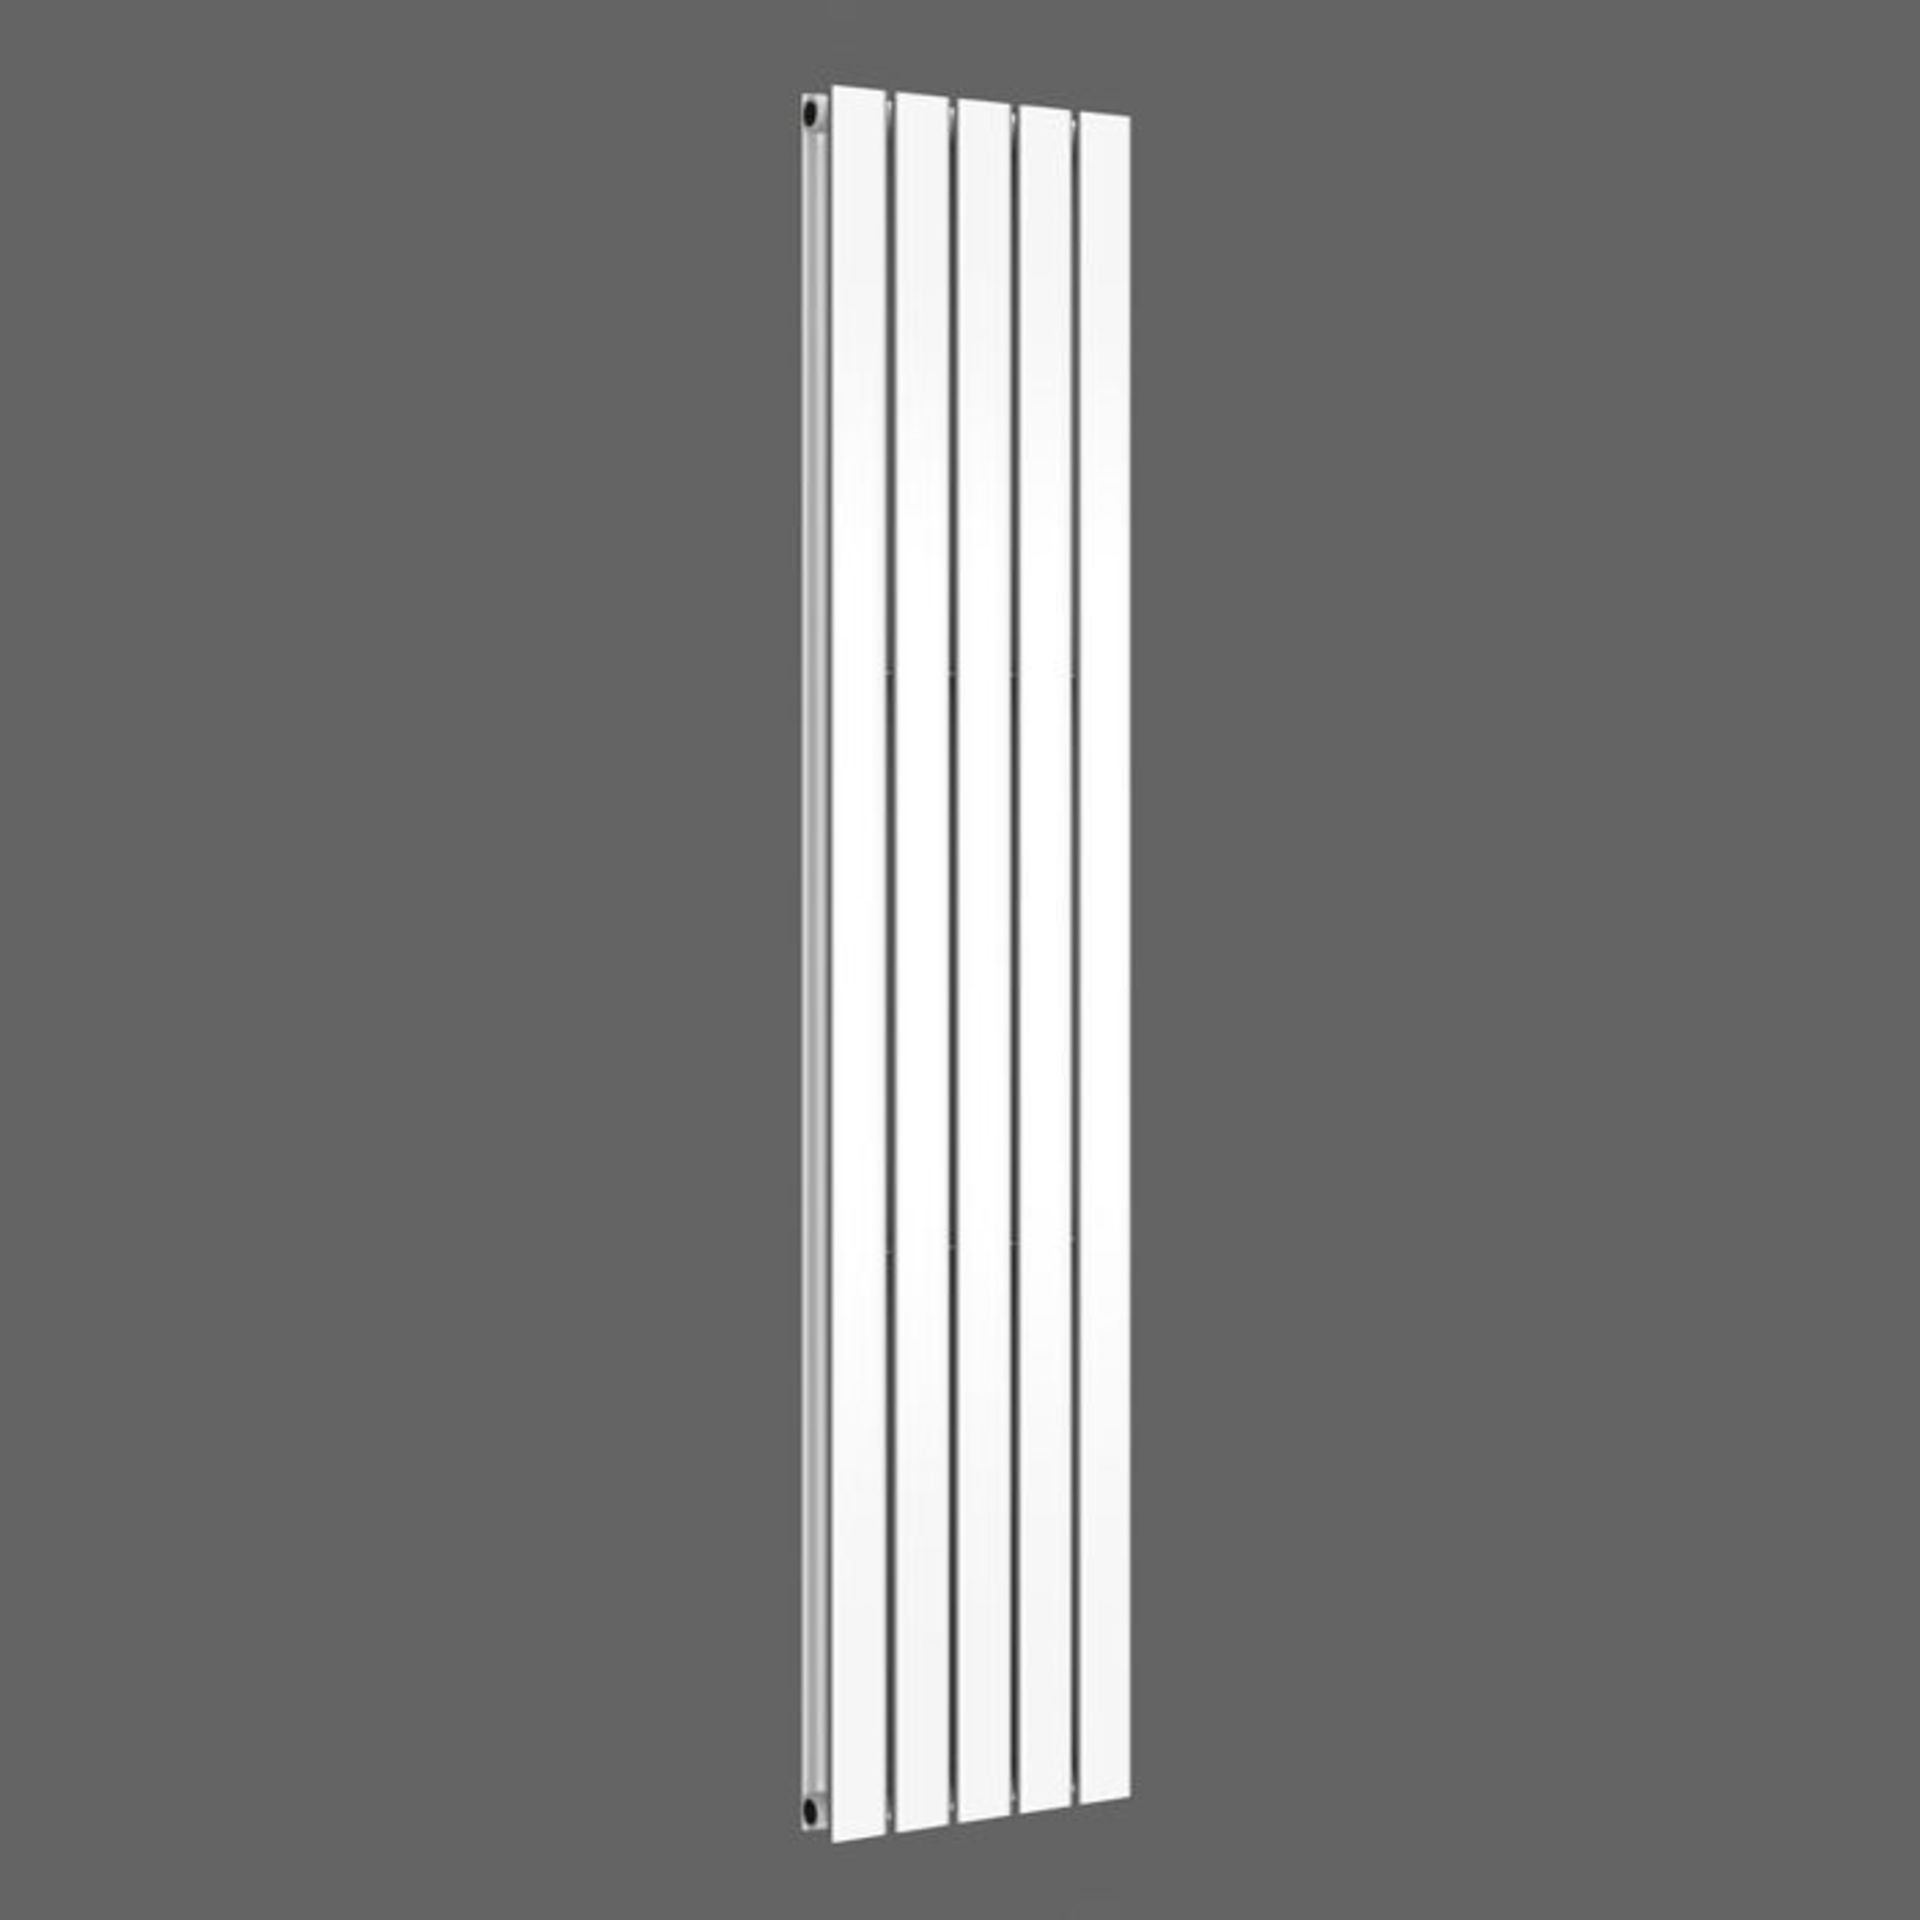 1600x480mm Gloss White Double Flat Panel Vertical Radiator. RRP £449.99. Made with low carbon ... - Image 3 of 3